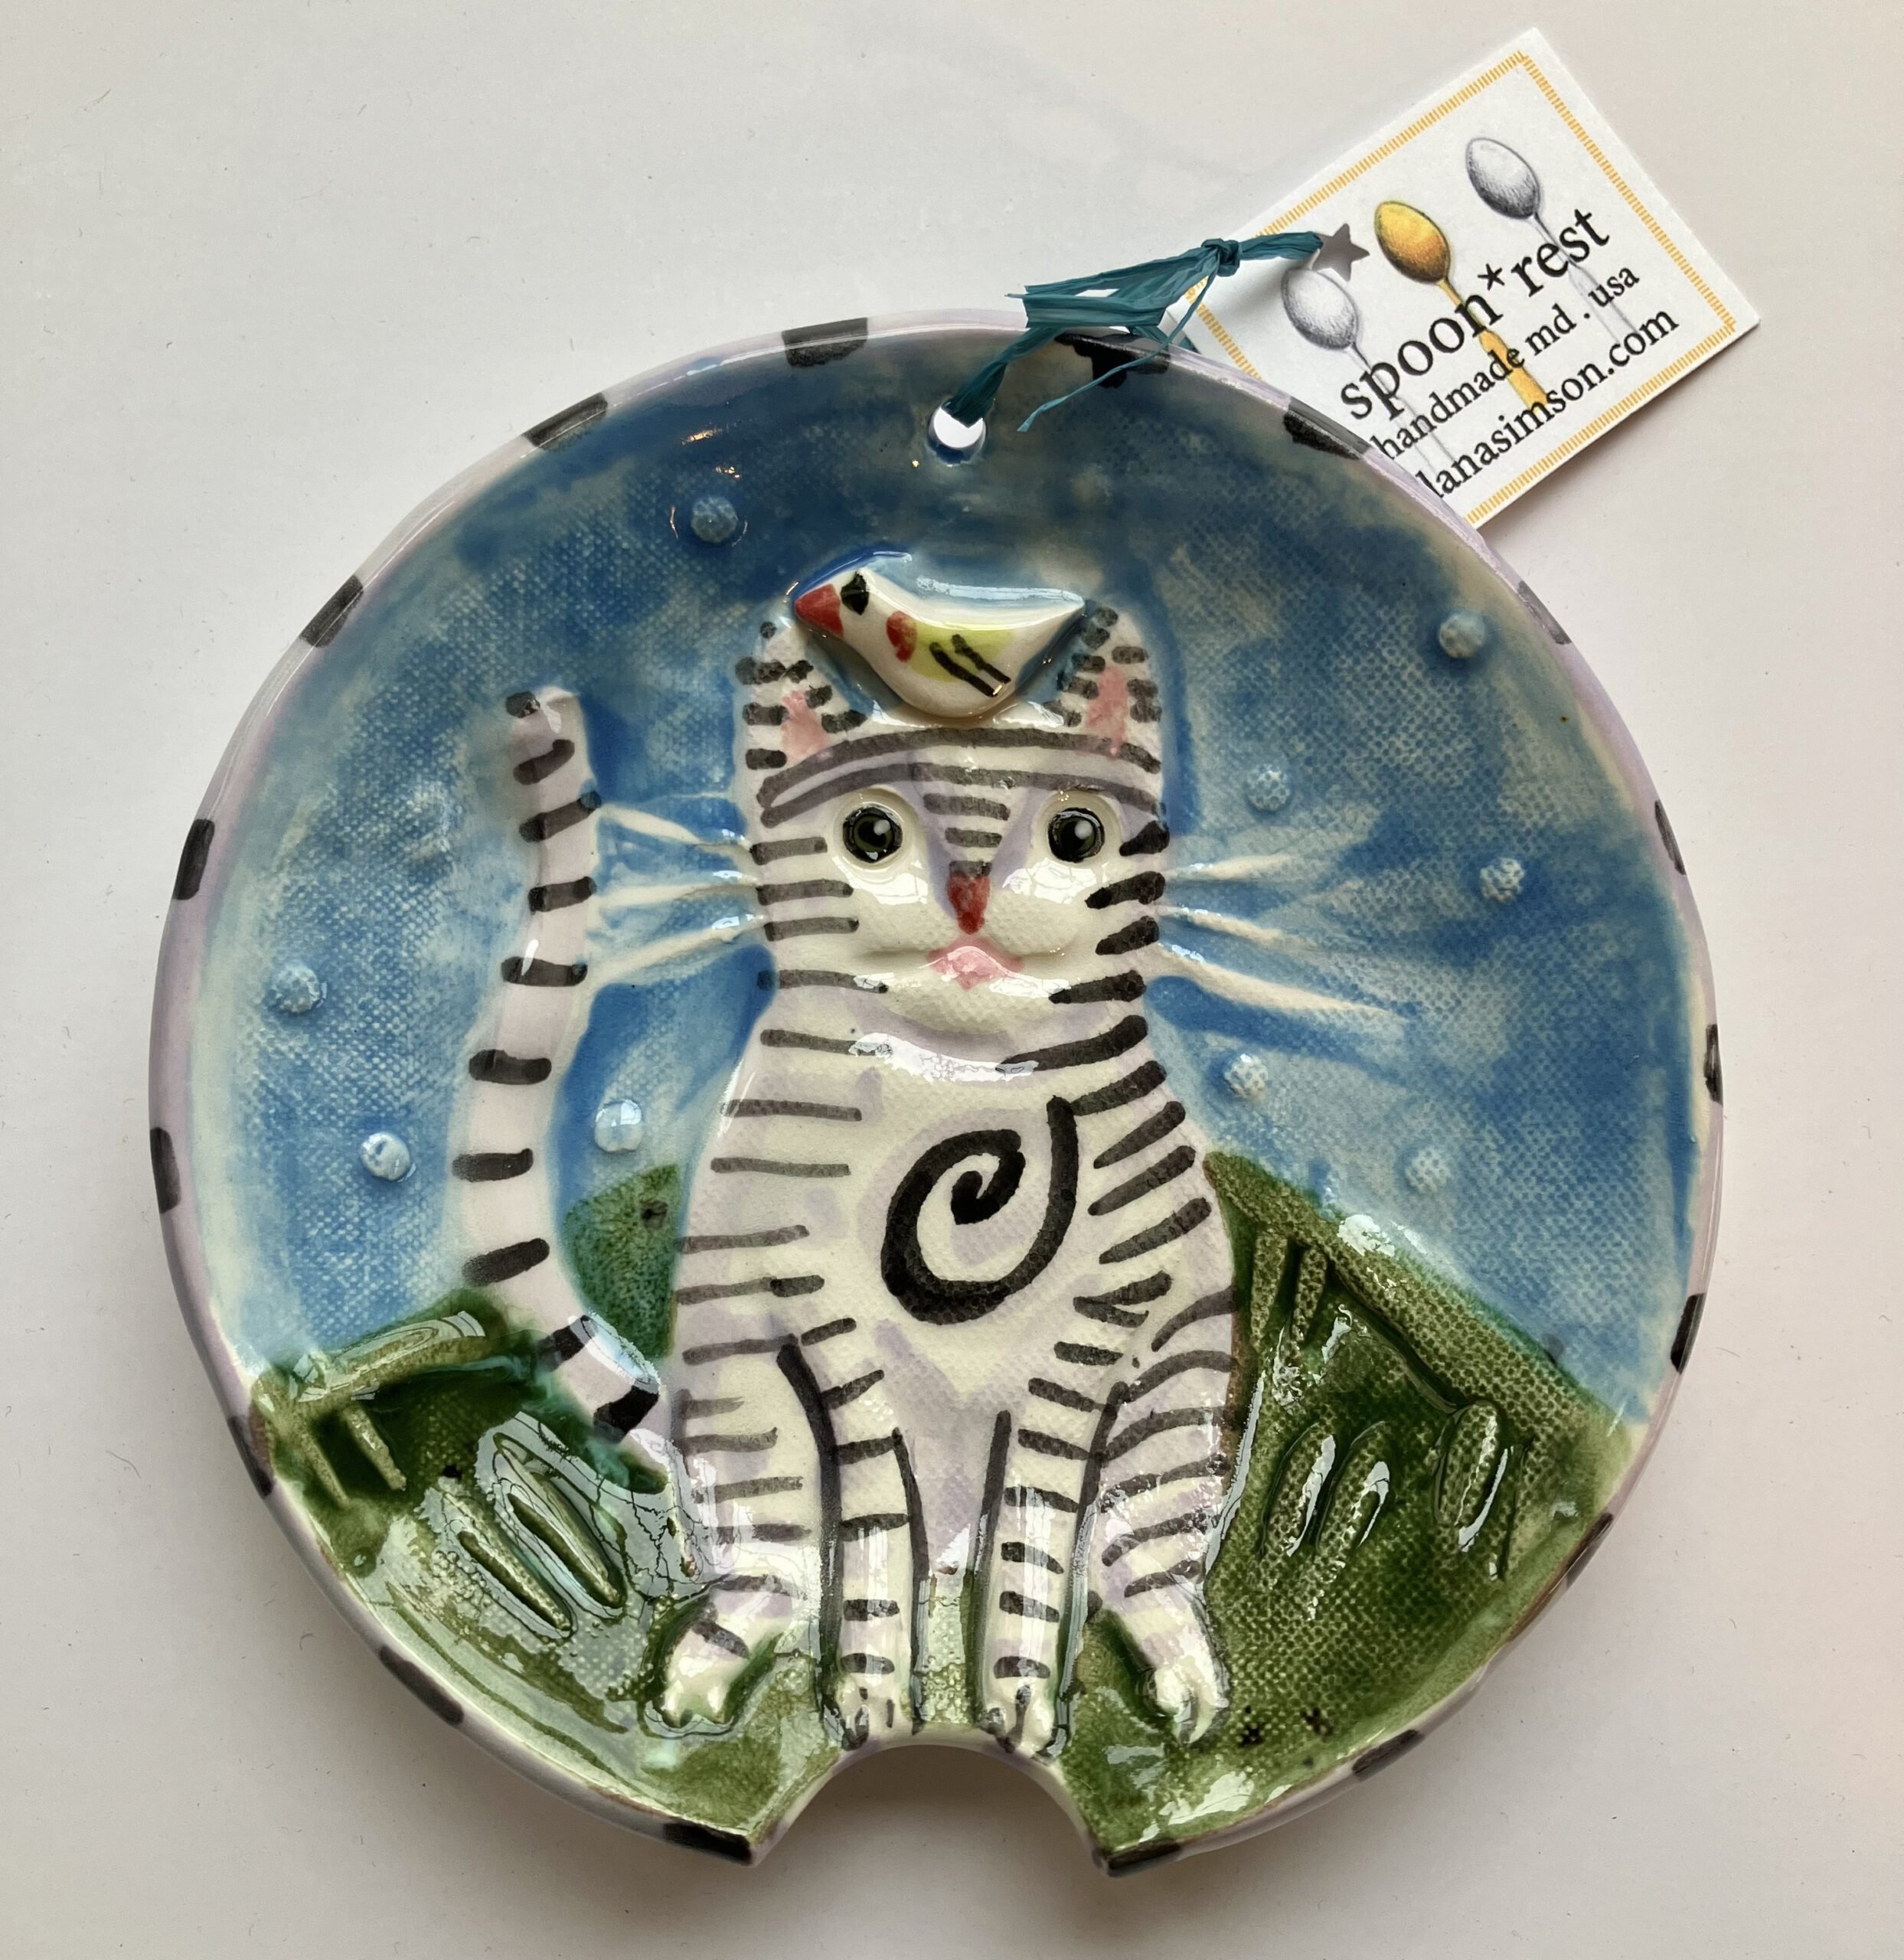 Our handmade ceramic striped cat spoon rest is fun functional art !